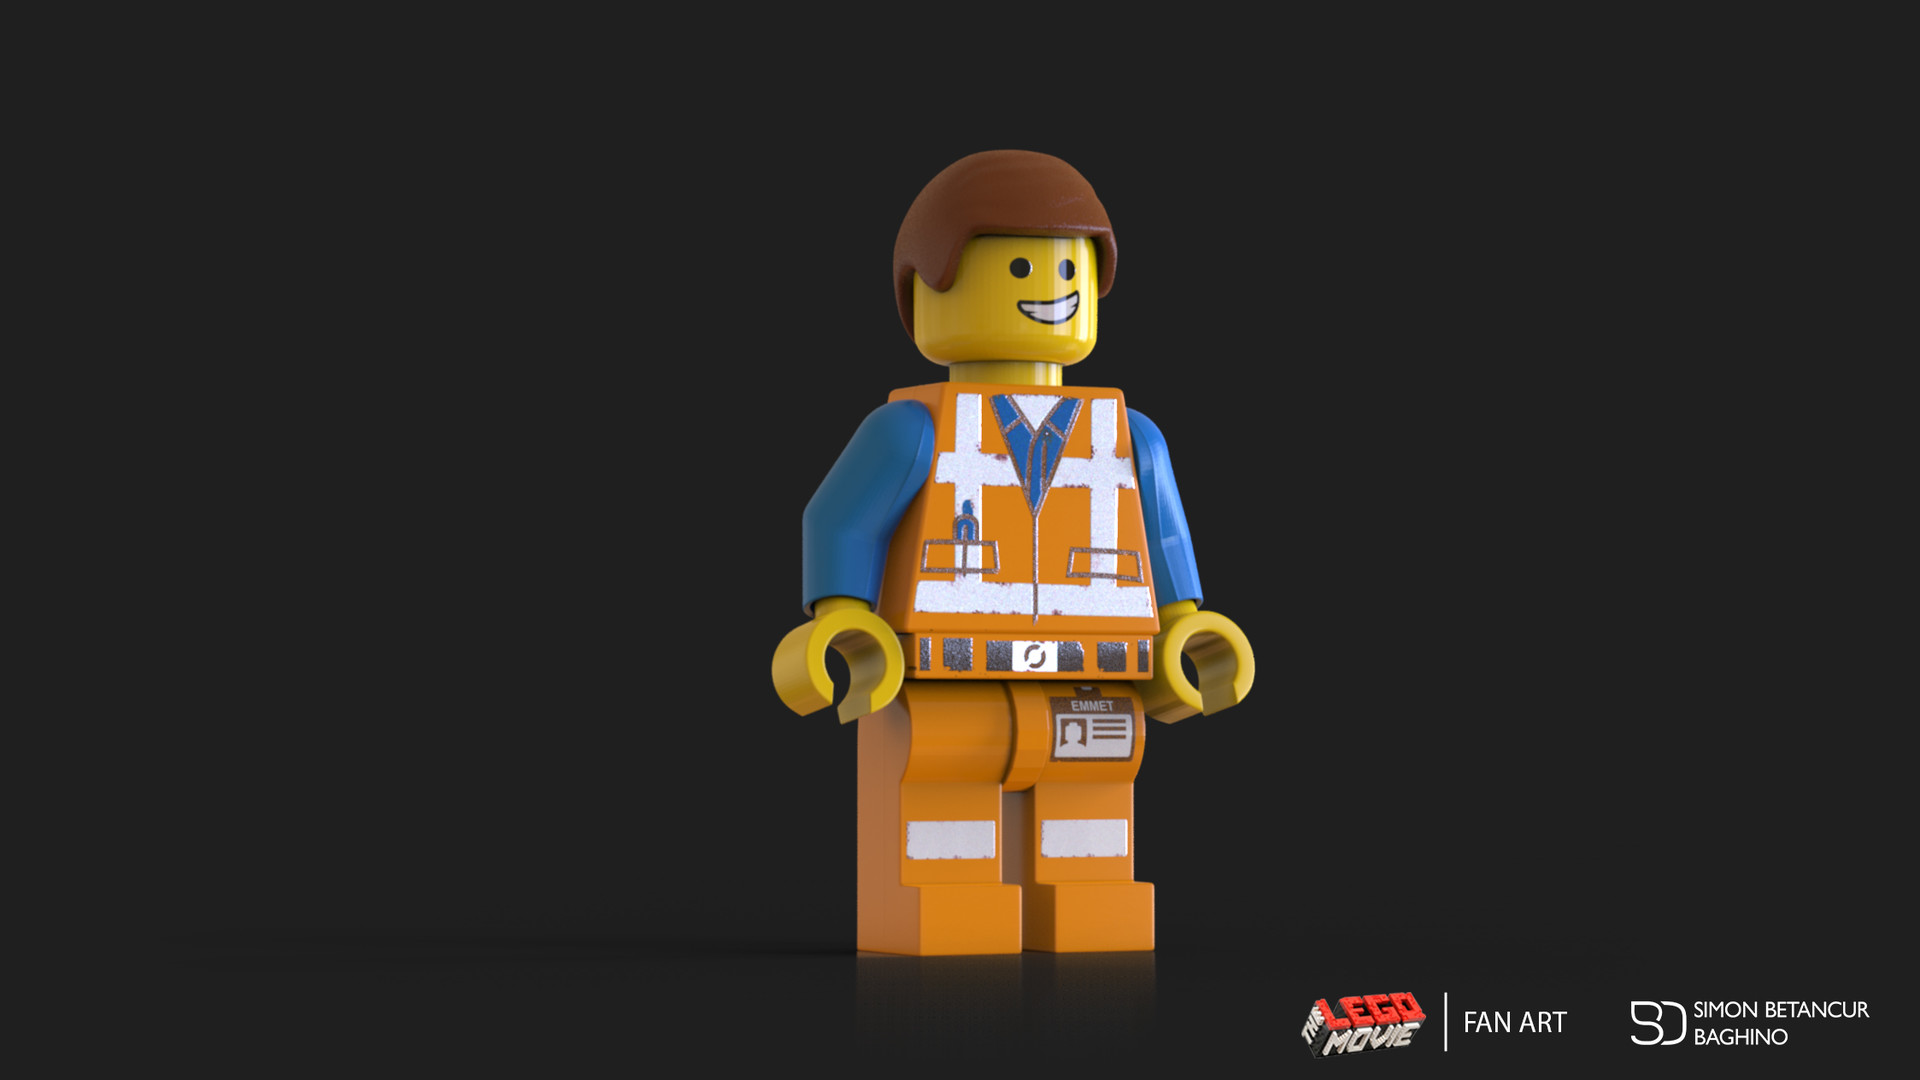 I am a fan of The Lego Movie so I made this Emmet model the main character ...